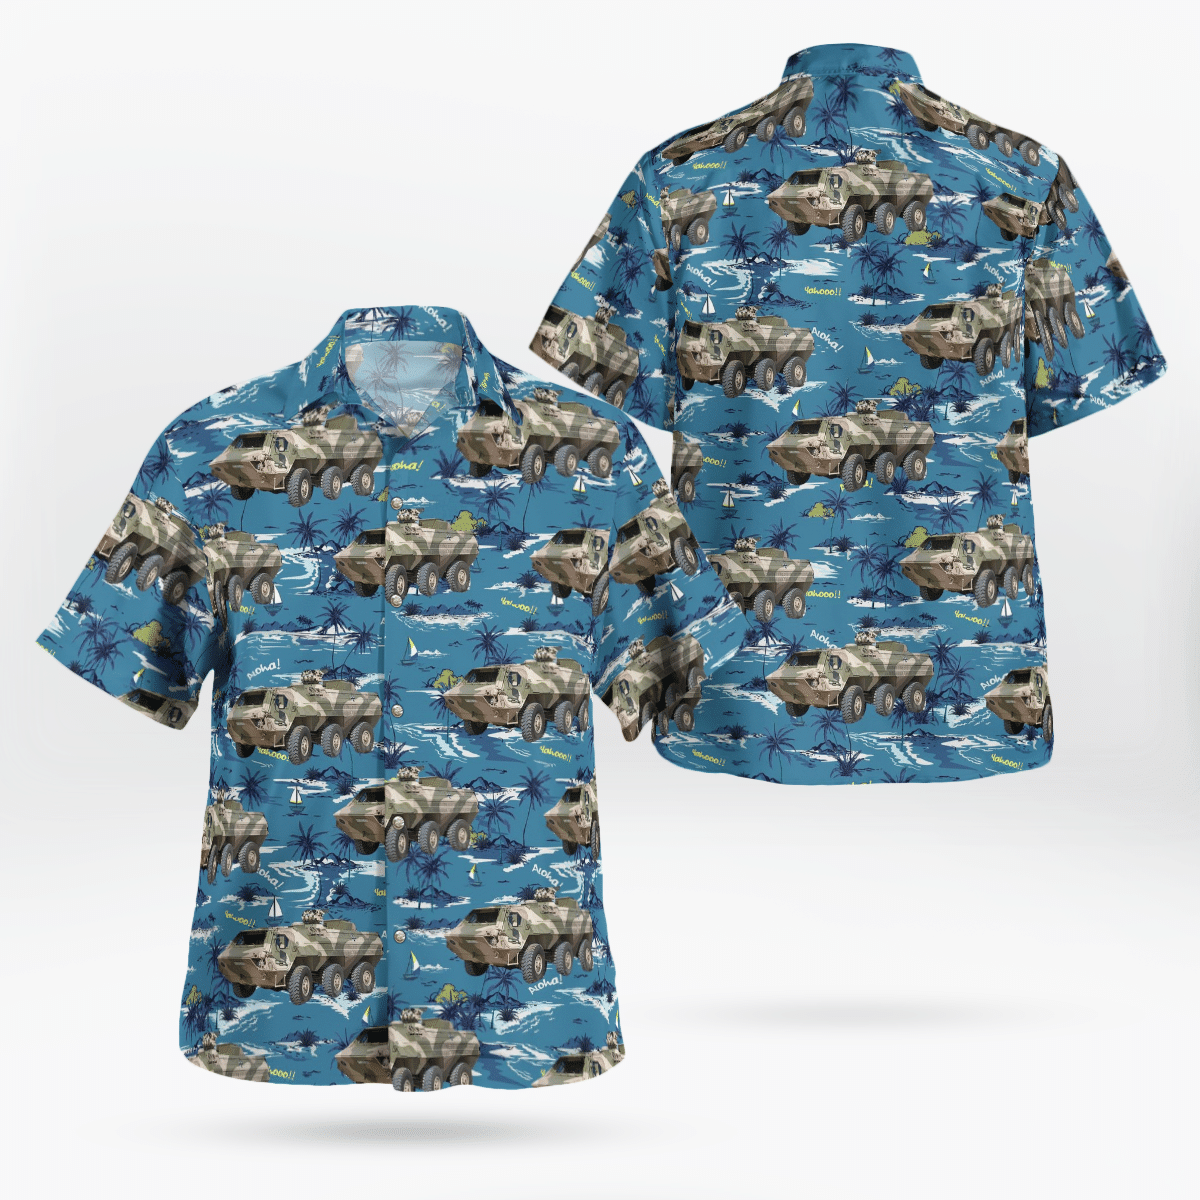 If you are in need of a new summertime look, pick up this Hawaiian shirt 216